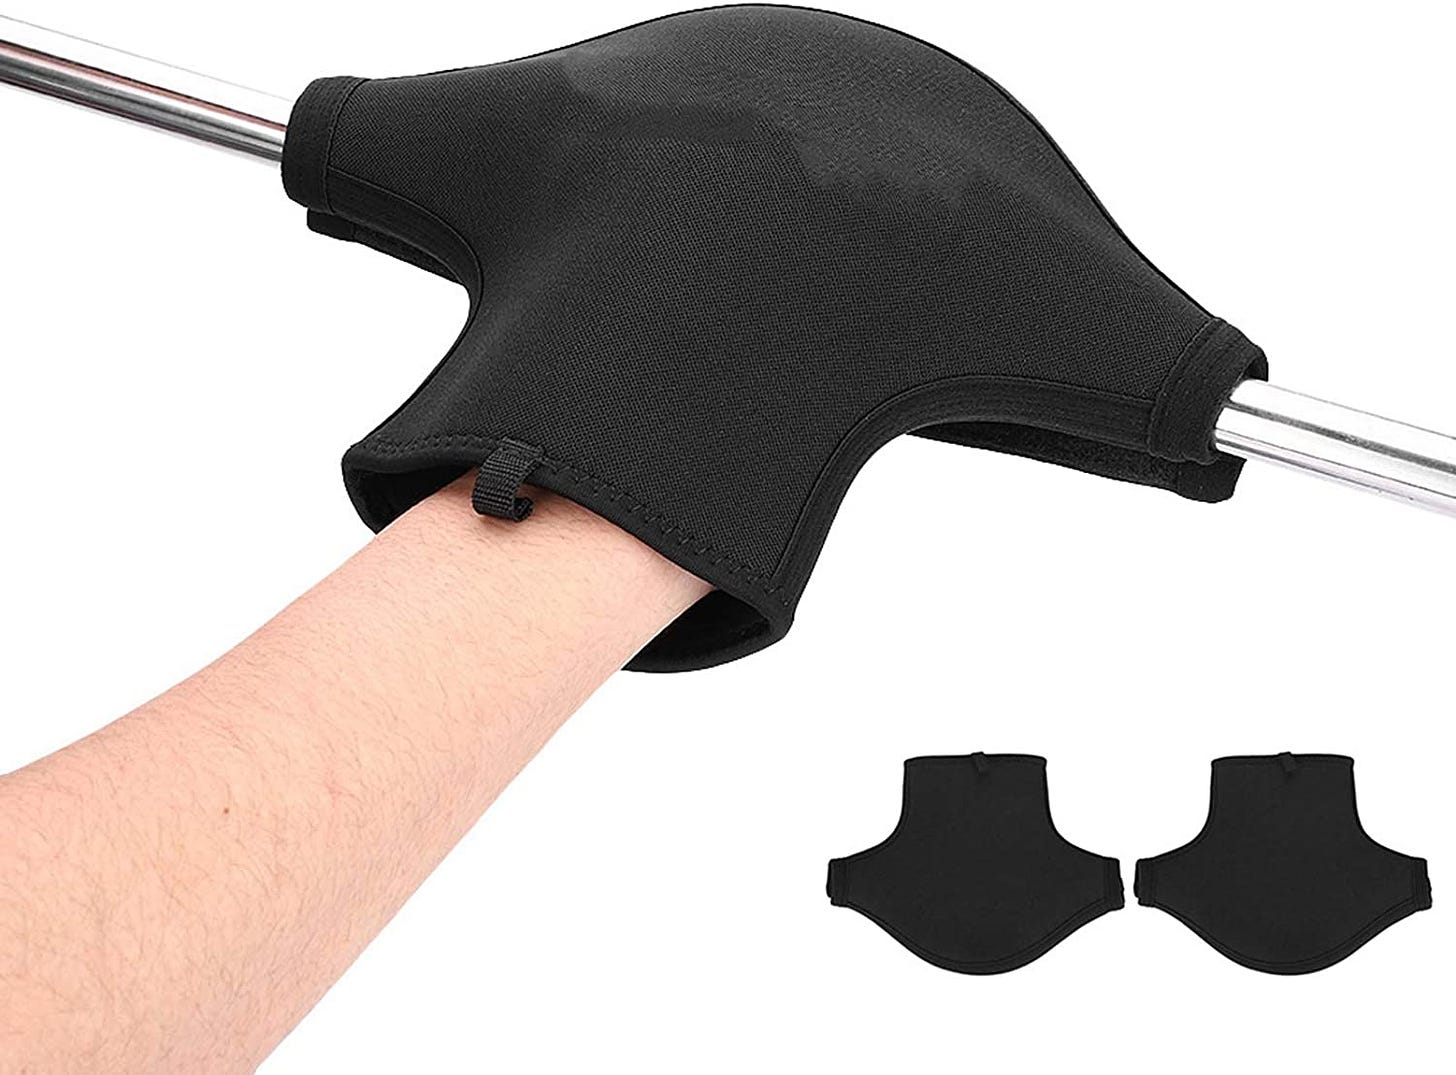 A product photo of a kayak paddle pogie in use. It is shaped like a neoprene hammerhead shark that you stick your hand into.